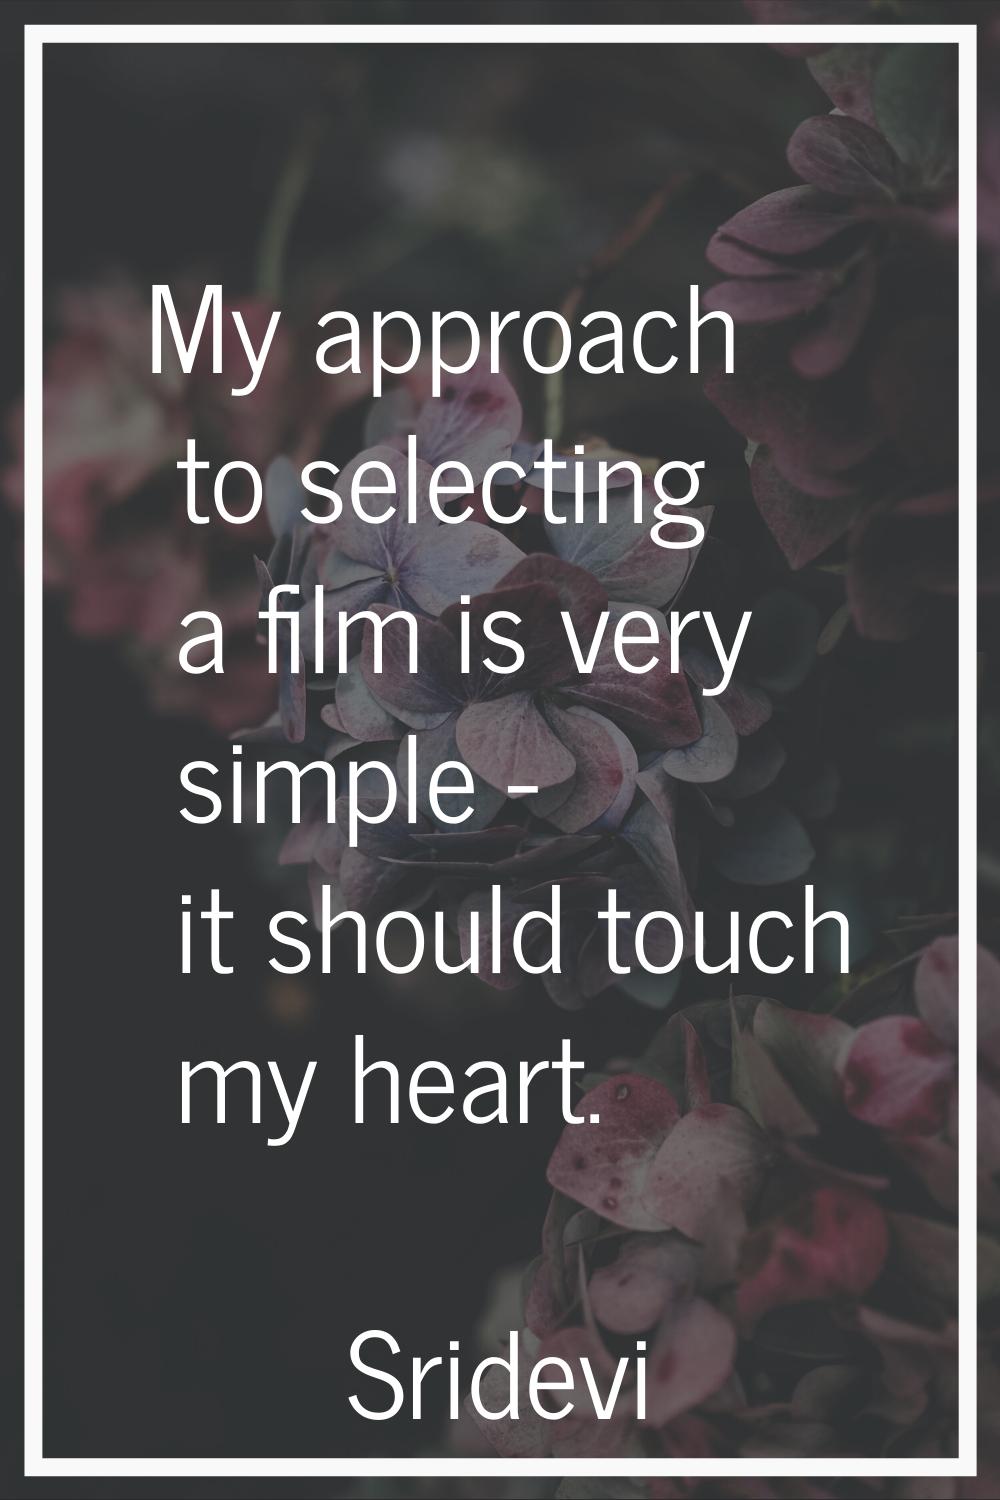 My approach to selecting a film is very simple - it should touch my heart.